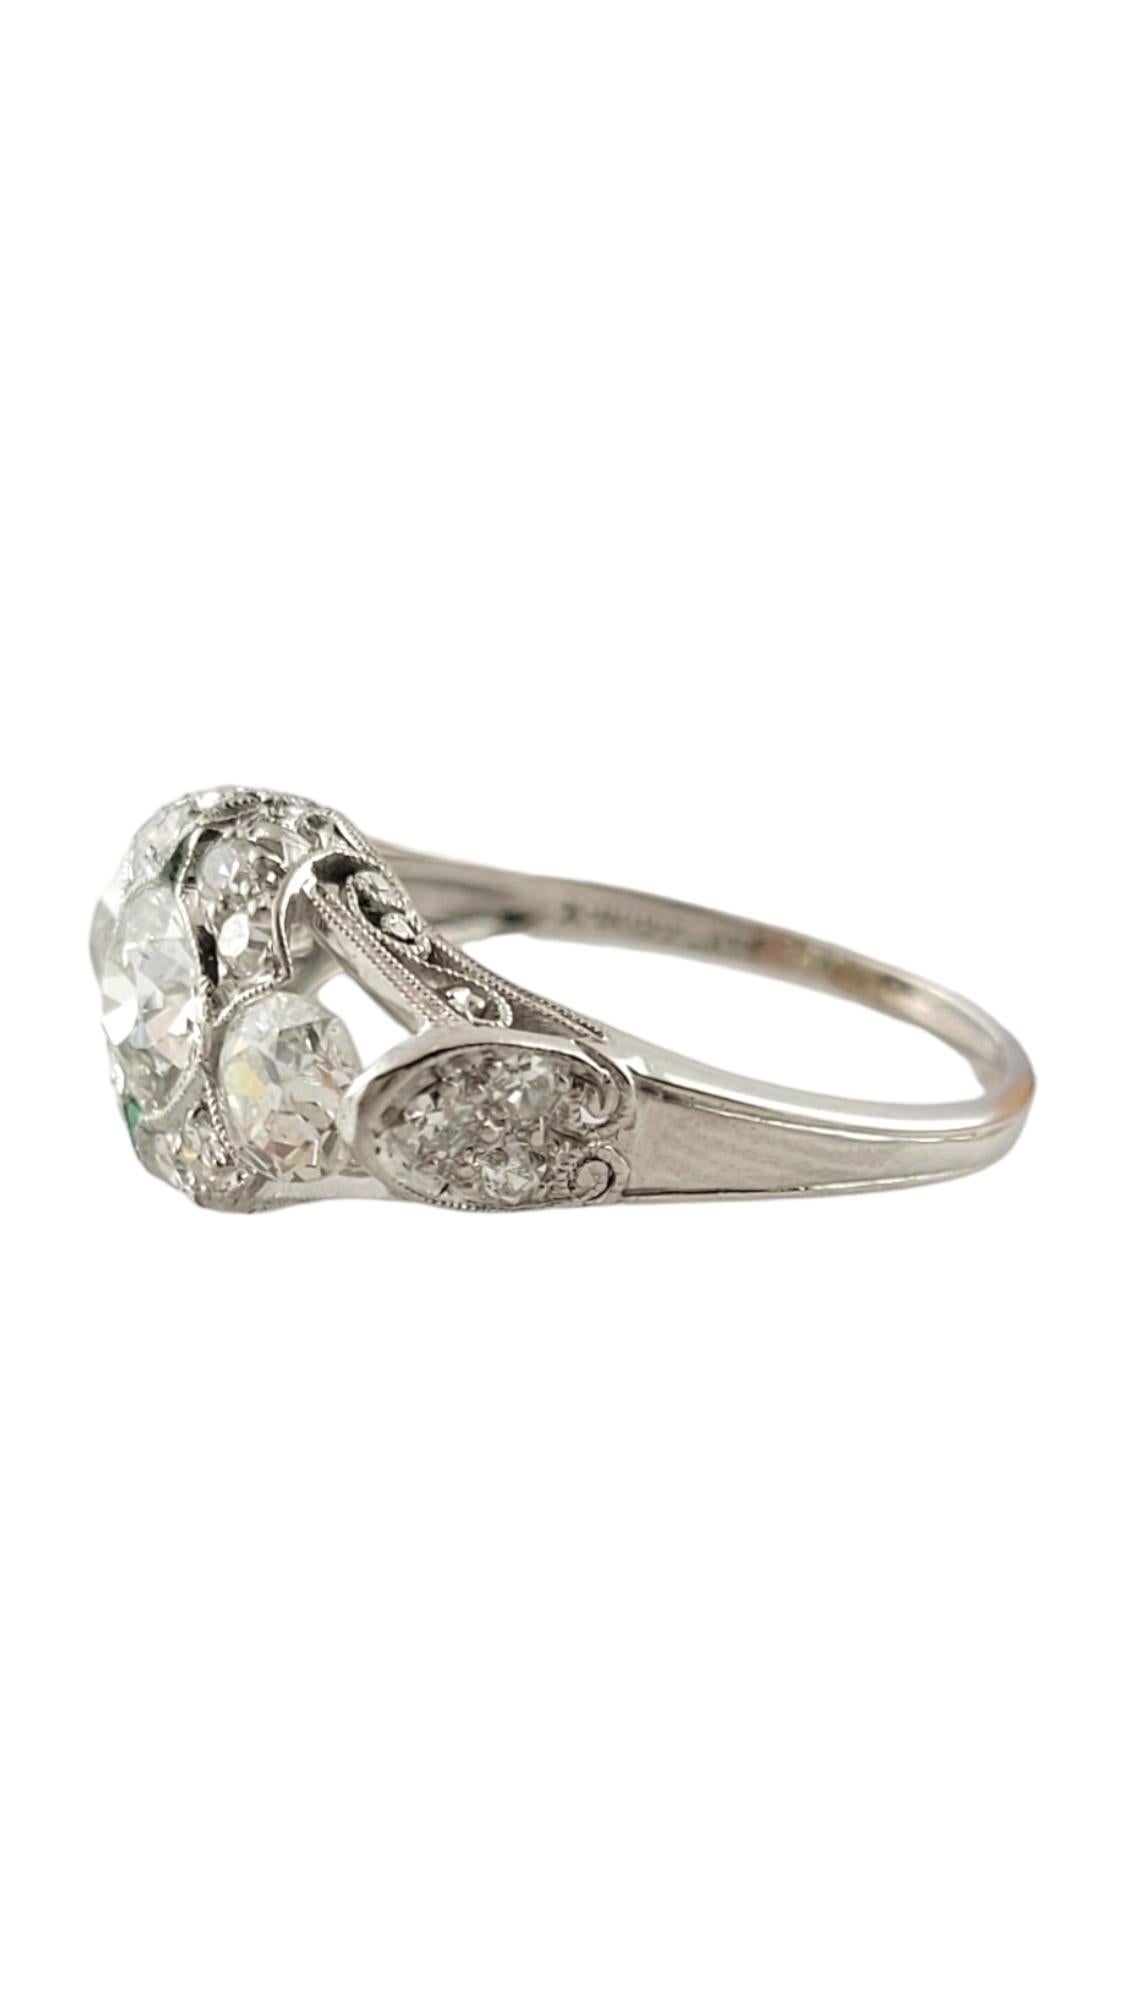 This sparkling ring features one round brilliant cut diamond in its center (.62 ct.) accented with 16 round brilliant cut diamonds and two natural trillion cut emeralds set in beautifully detailed platinum.  

Width:  10 mm.  Shank:  1.5 mm.

Total